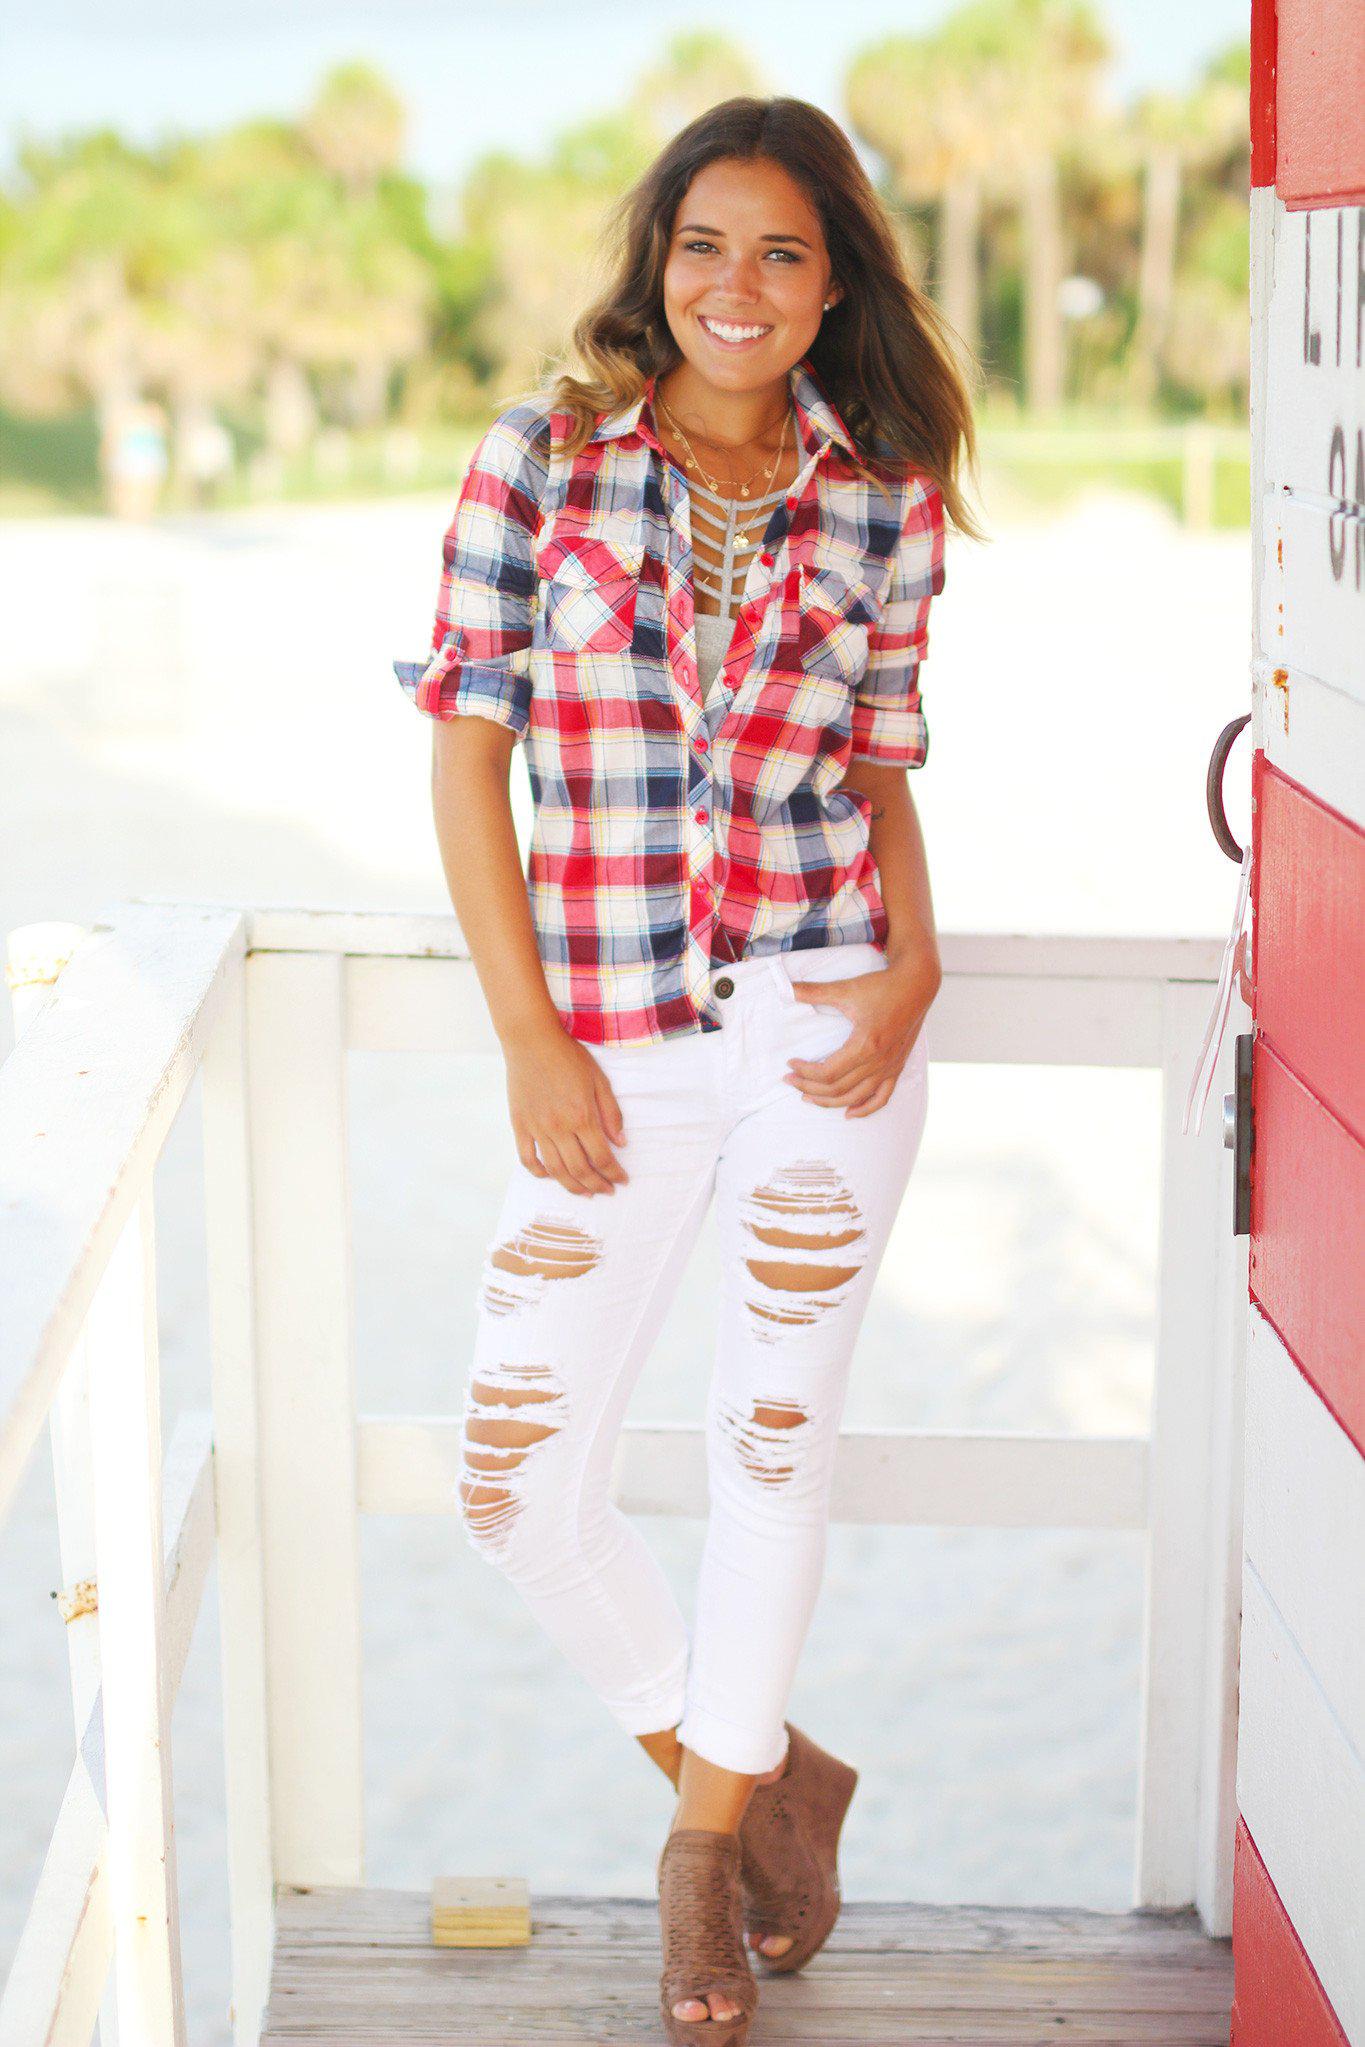 Blue and Red Plaid Top